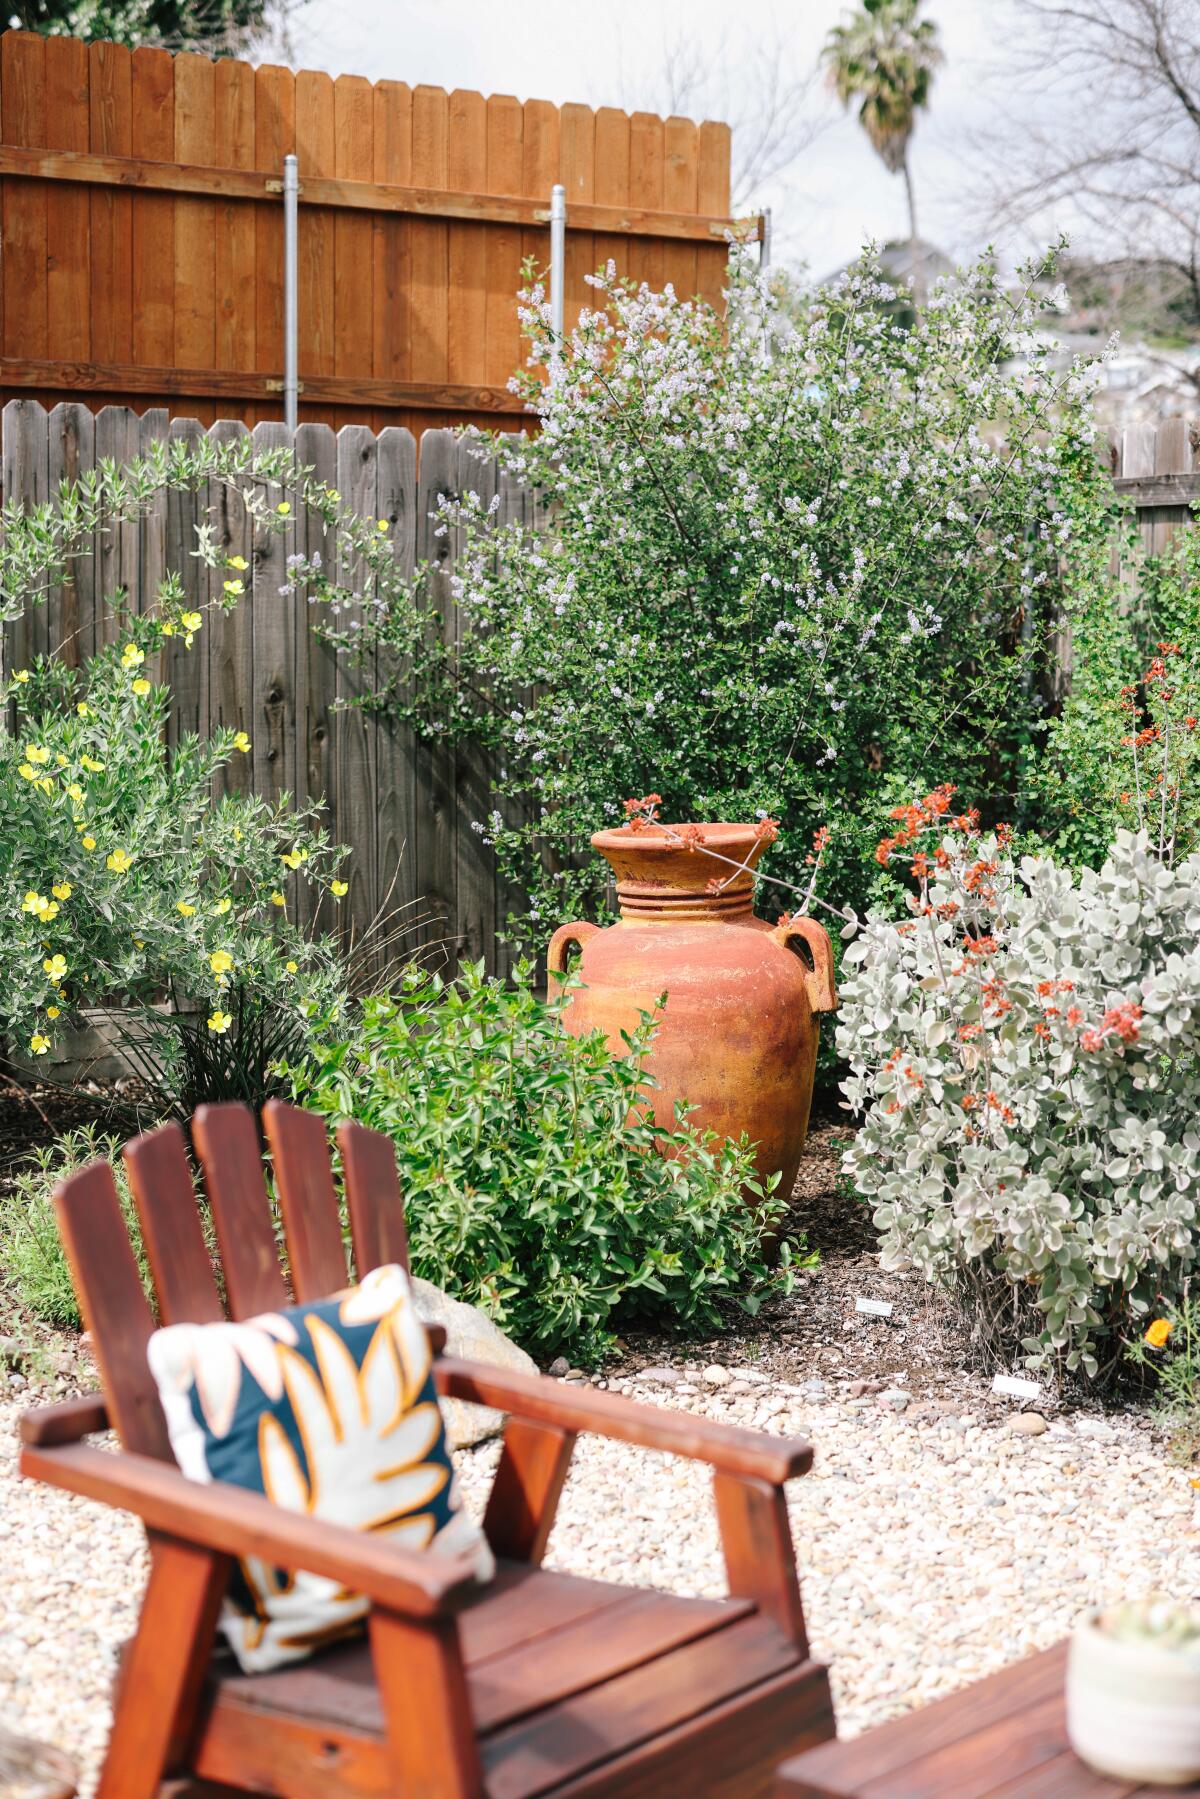 An oasis of native plants grows at Raul Rojas and Thomas Zamora's 1923 Highland Park bungalow.